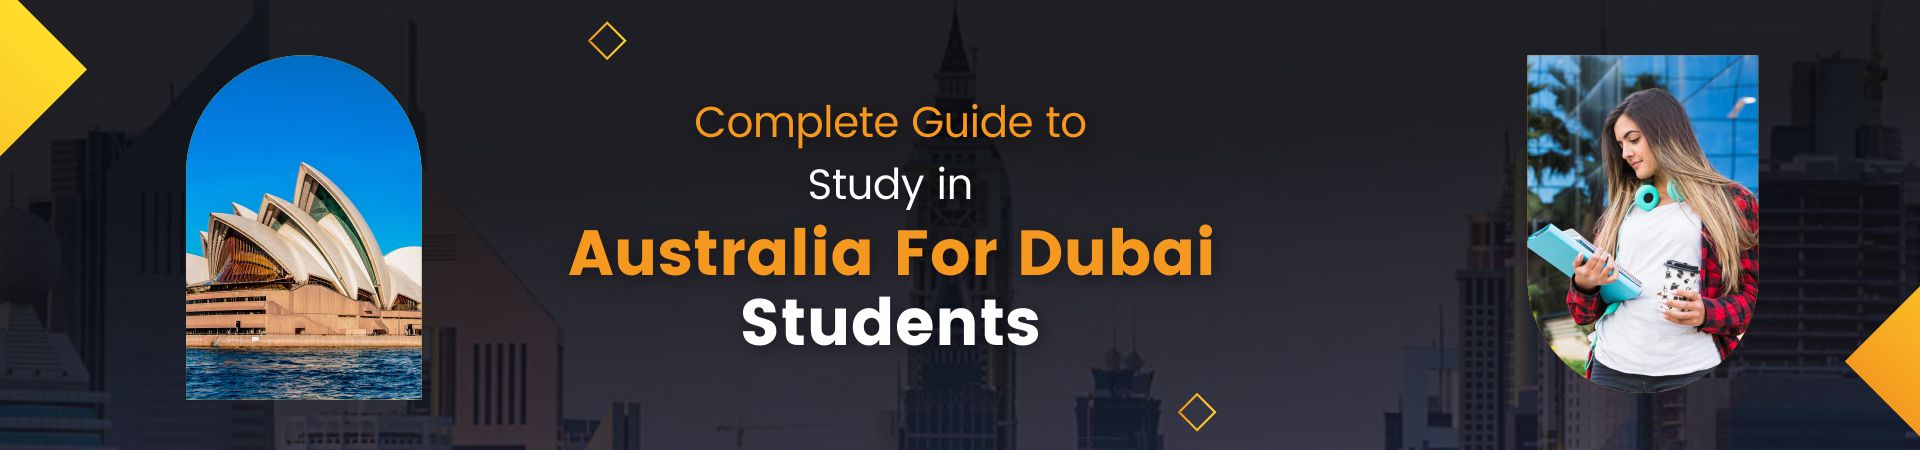 Complete guide to study in Australia for Dubai students